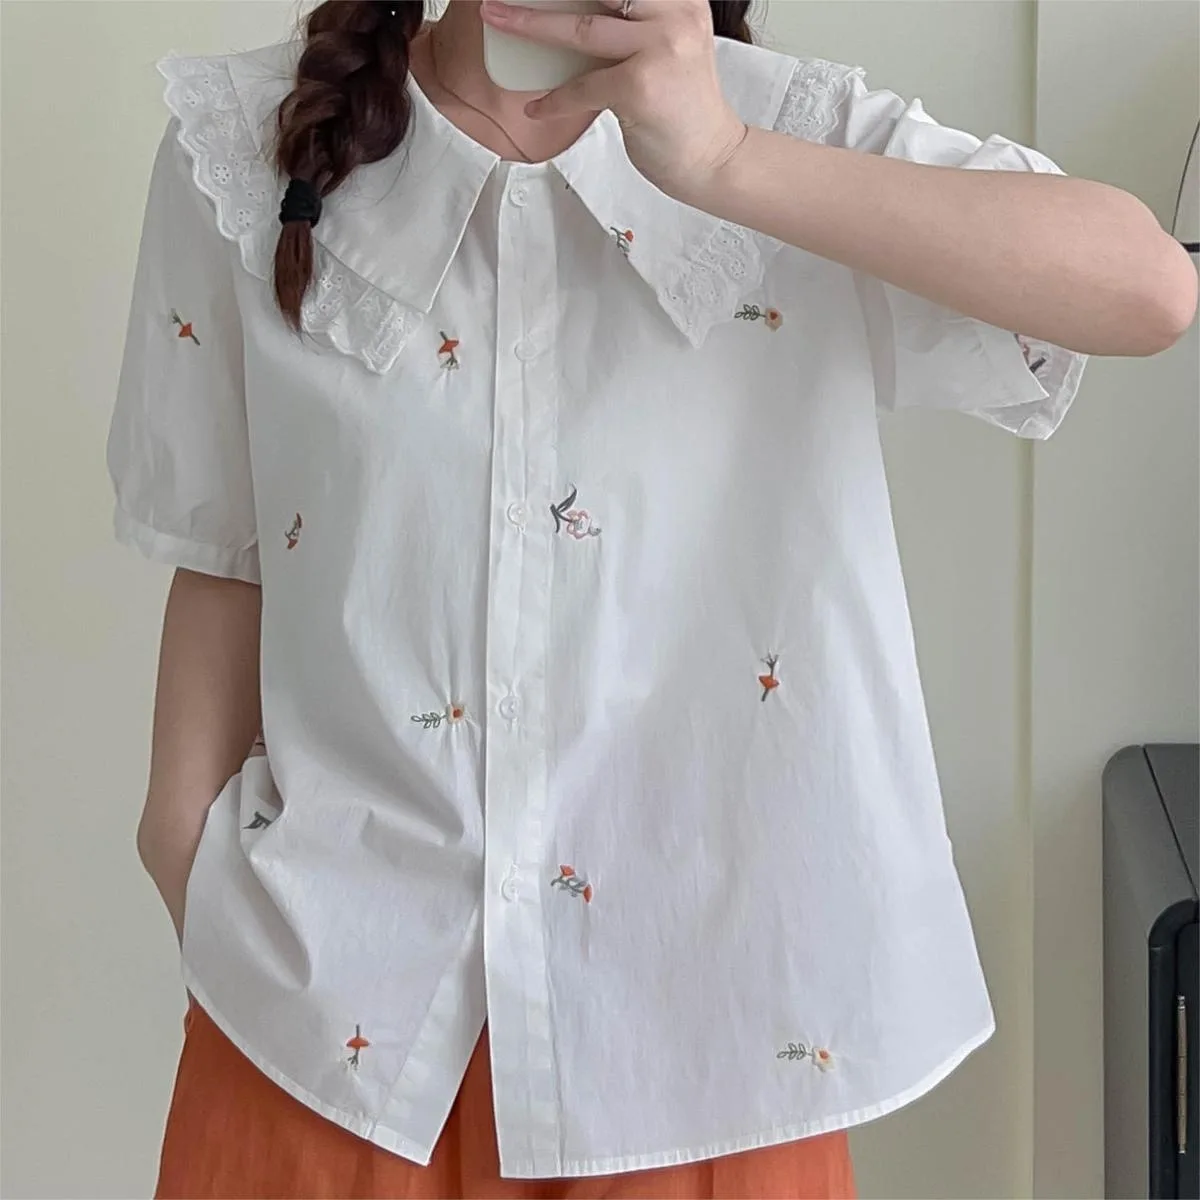 

100% Cotton Short Sleeve Shirt Mori Girl Summer Japan Fashion Sweet Lace Turndown Collar Embroider Blouses Preppy Style Tops